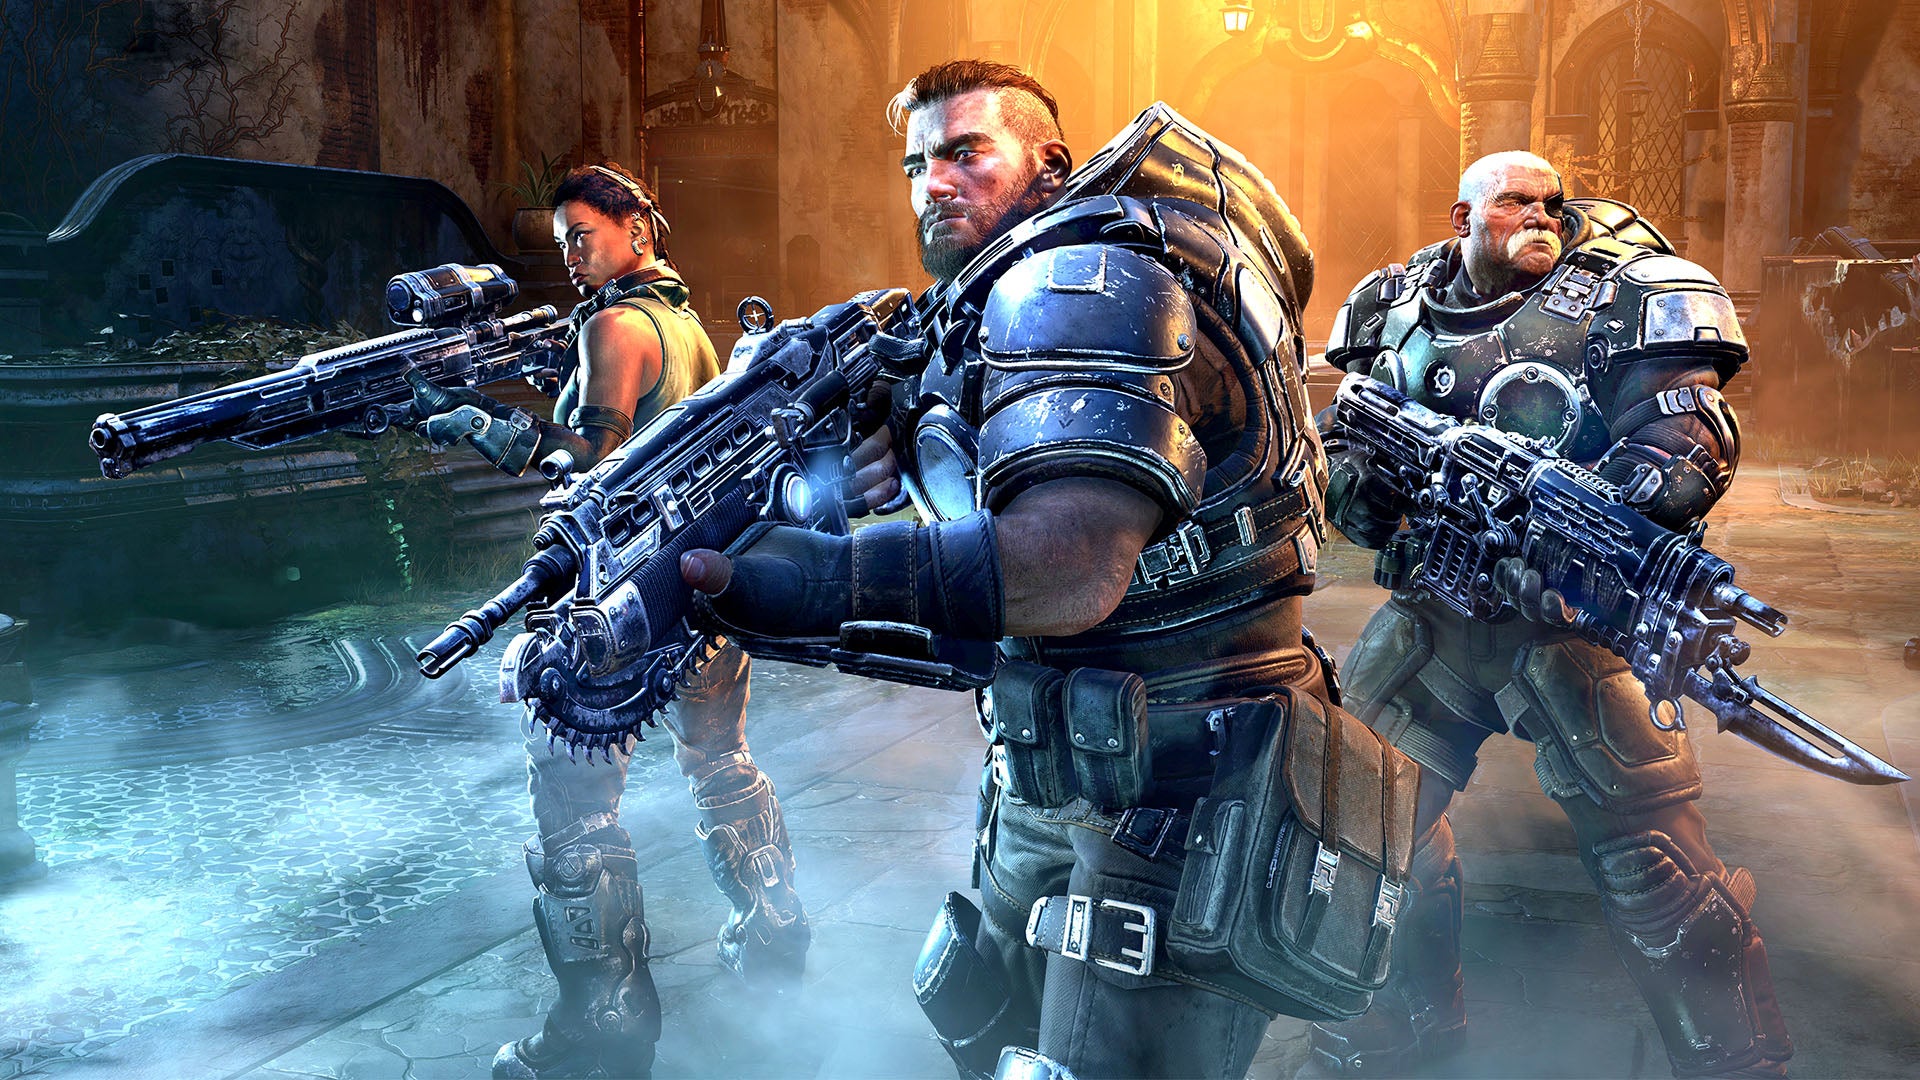 Image for Gears Tactics PC Is Excellent! The Digital Foundry Tech Review